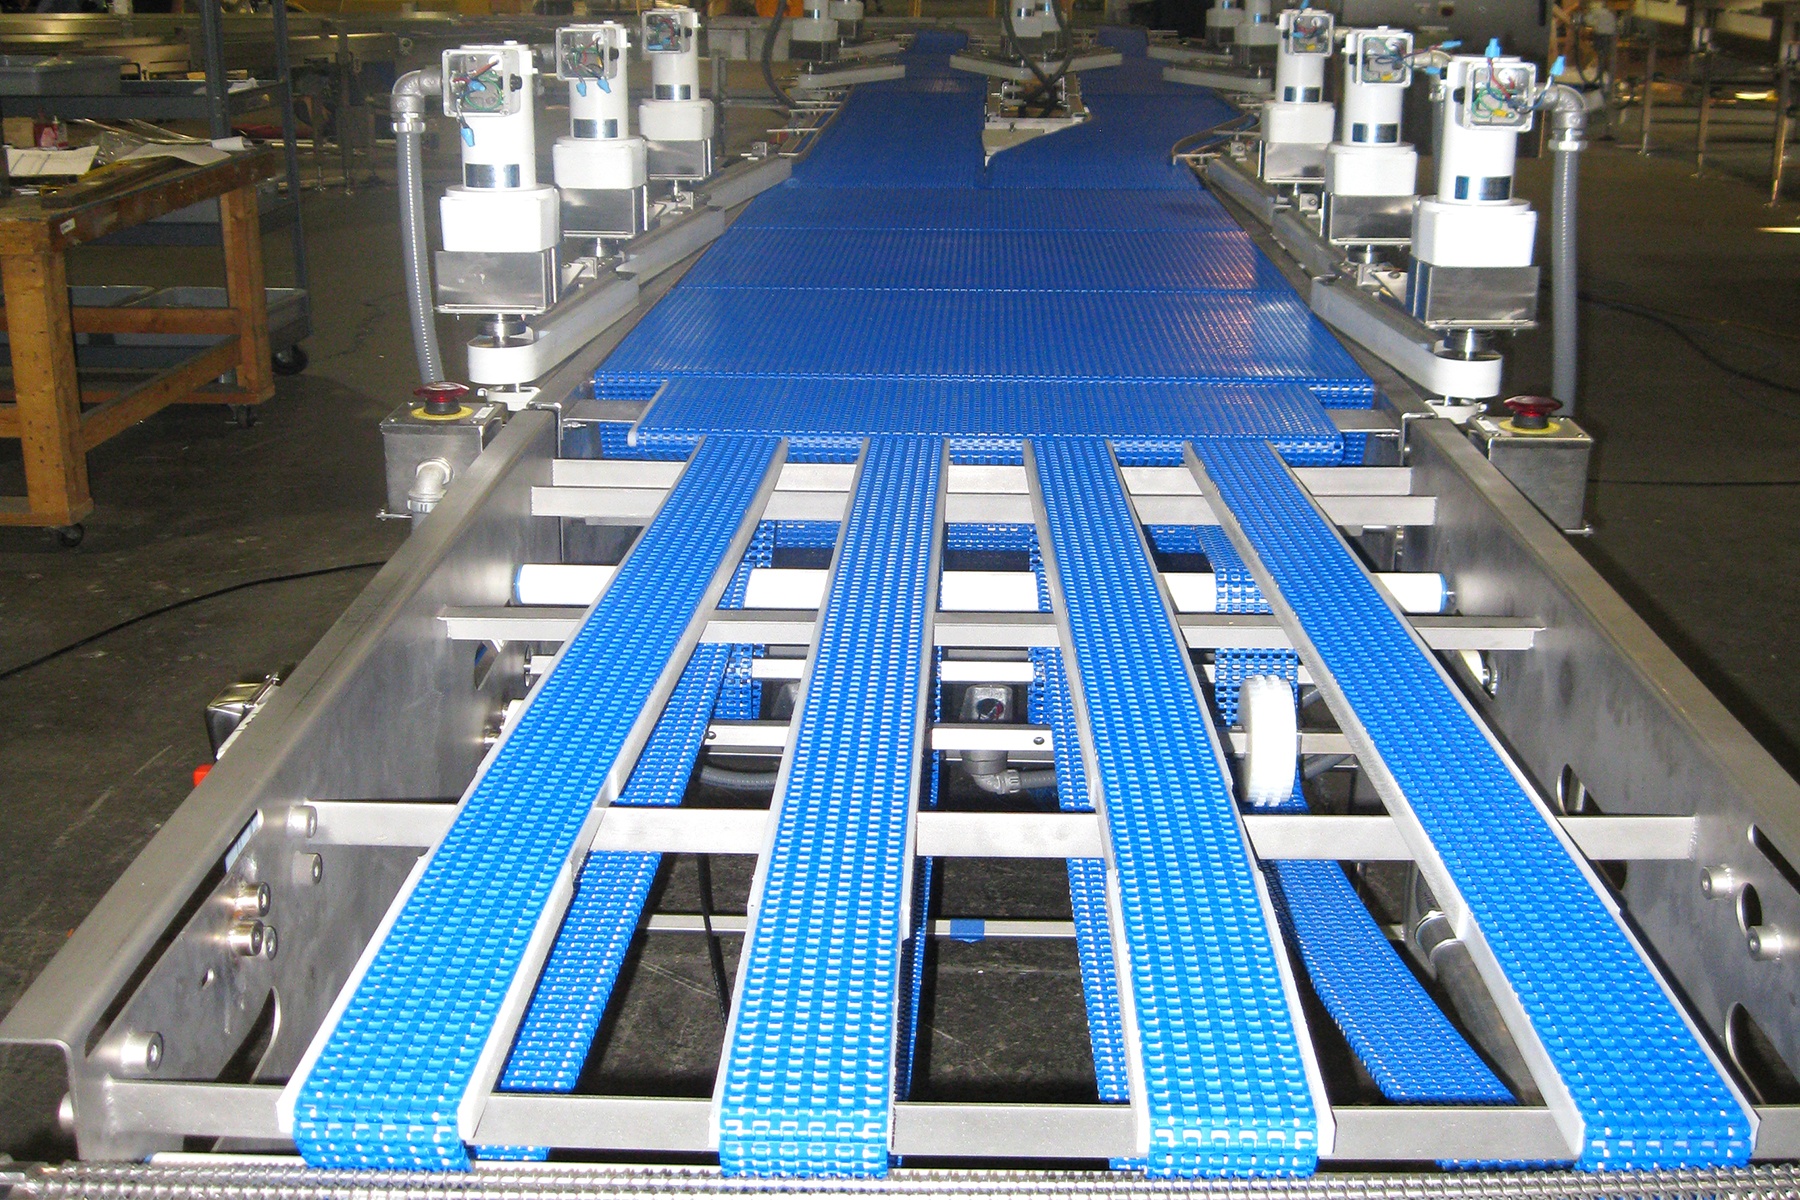 Evaluating And Designing Multi-Strand Conveyor Styles And